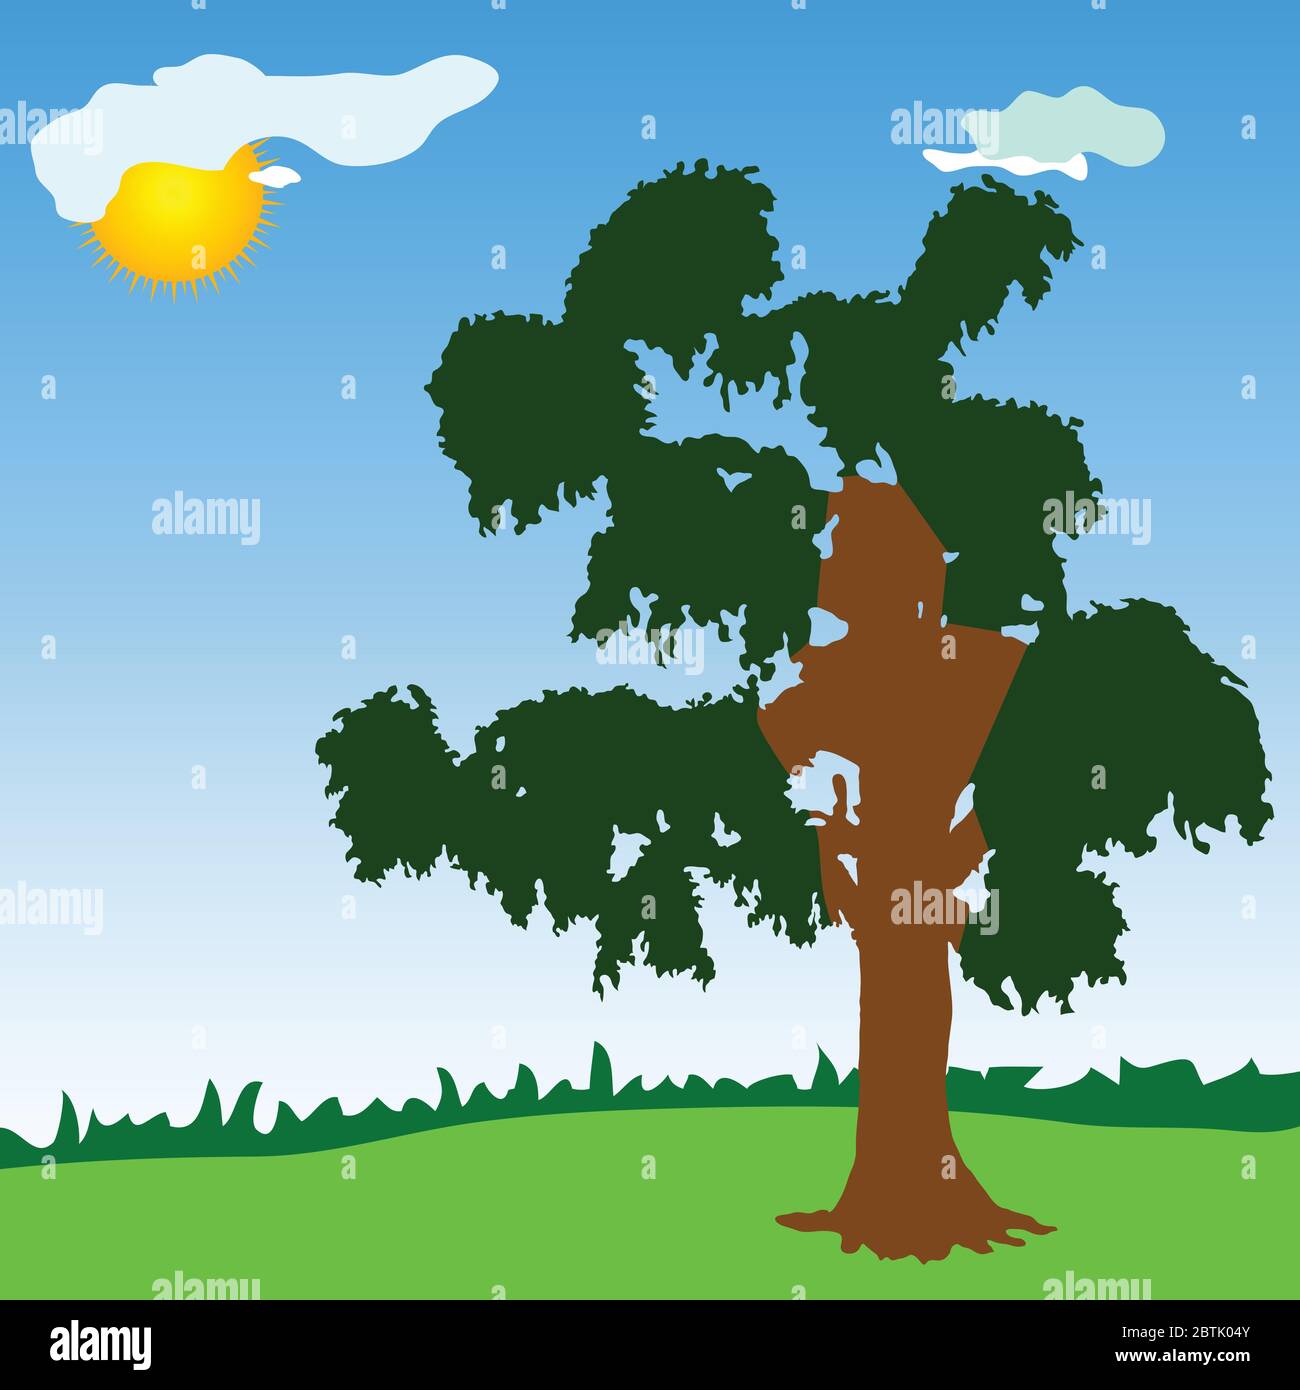 tree with green leave vector illustration on blue with sun Stock Vector